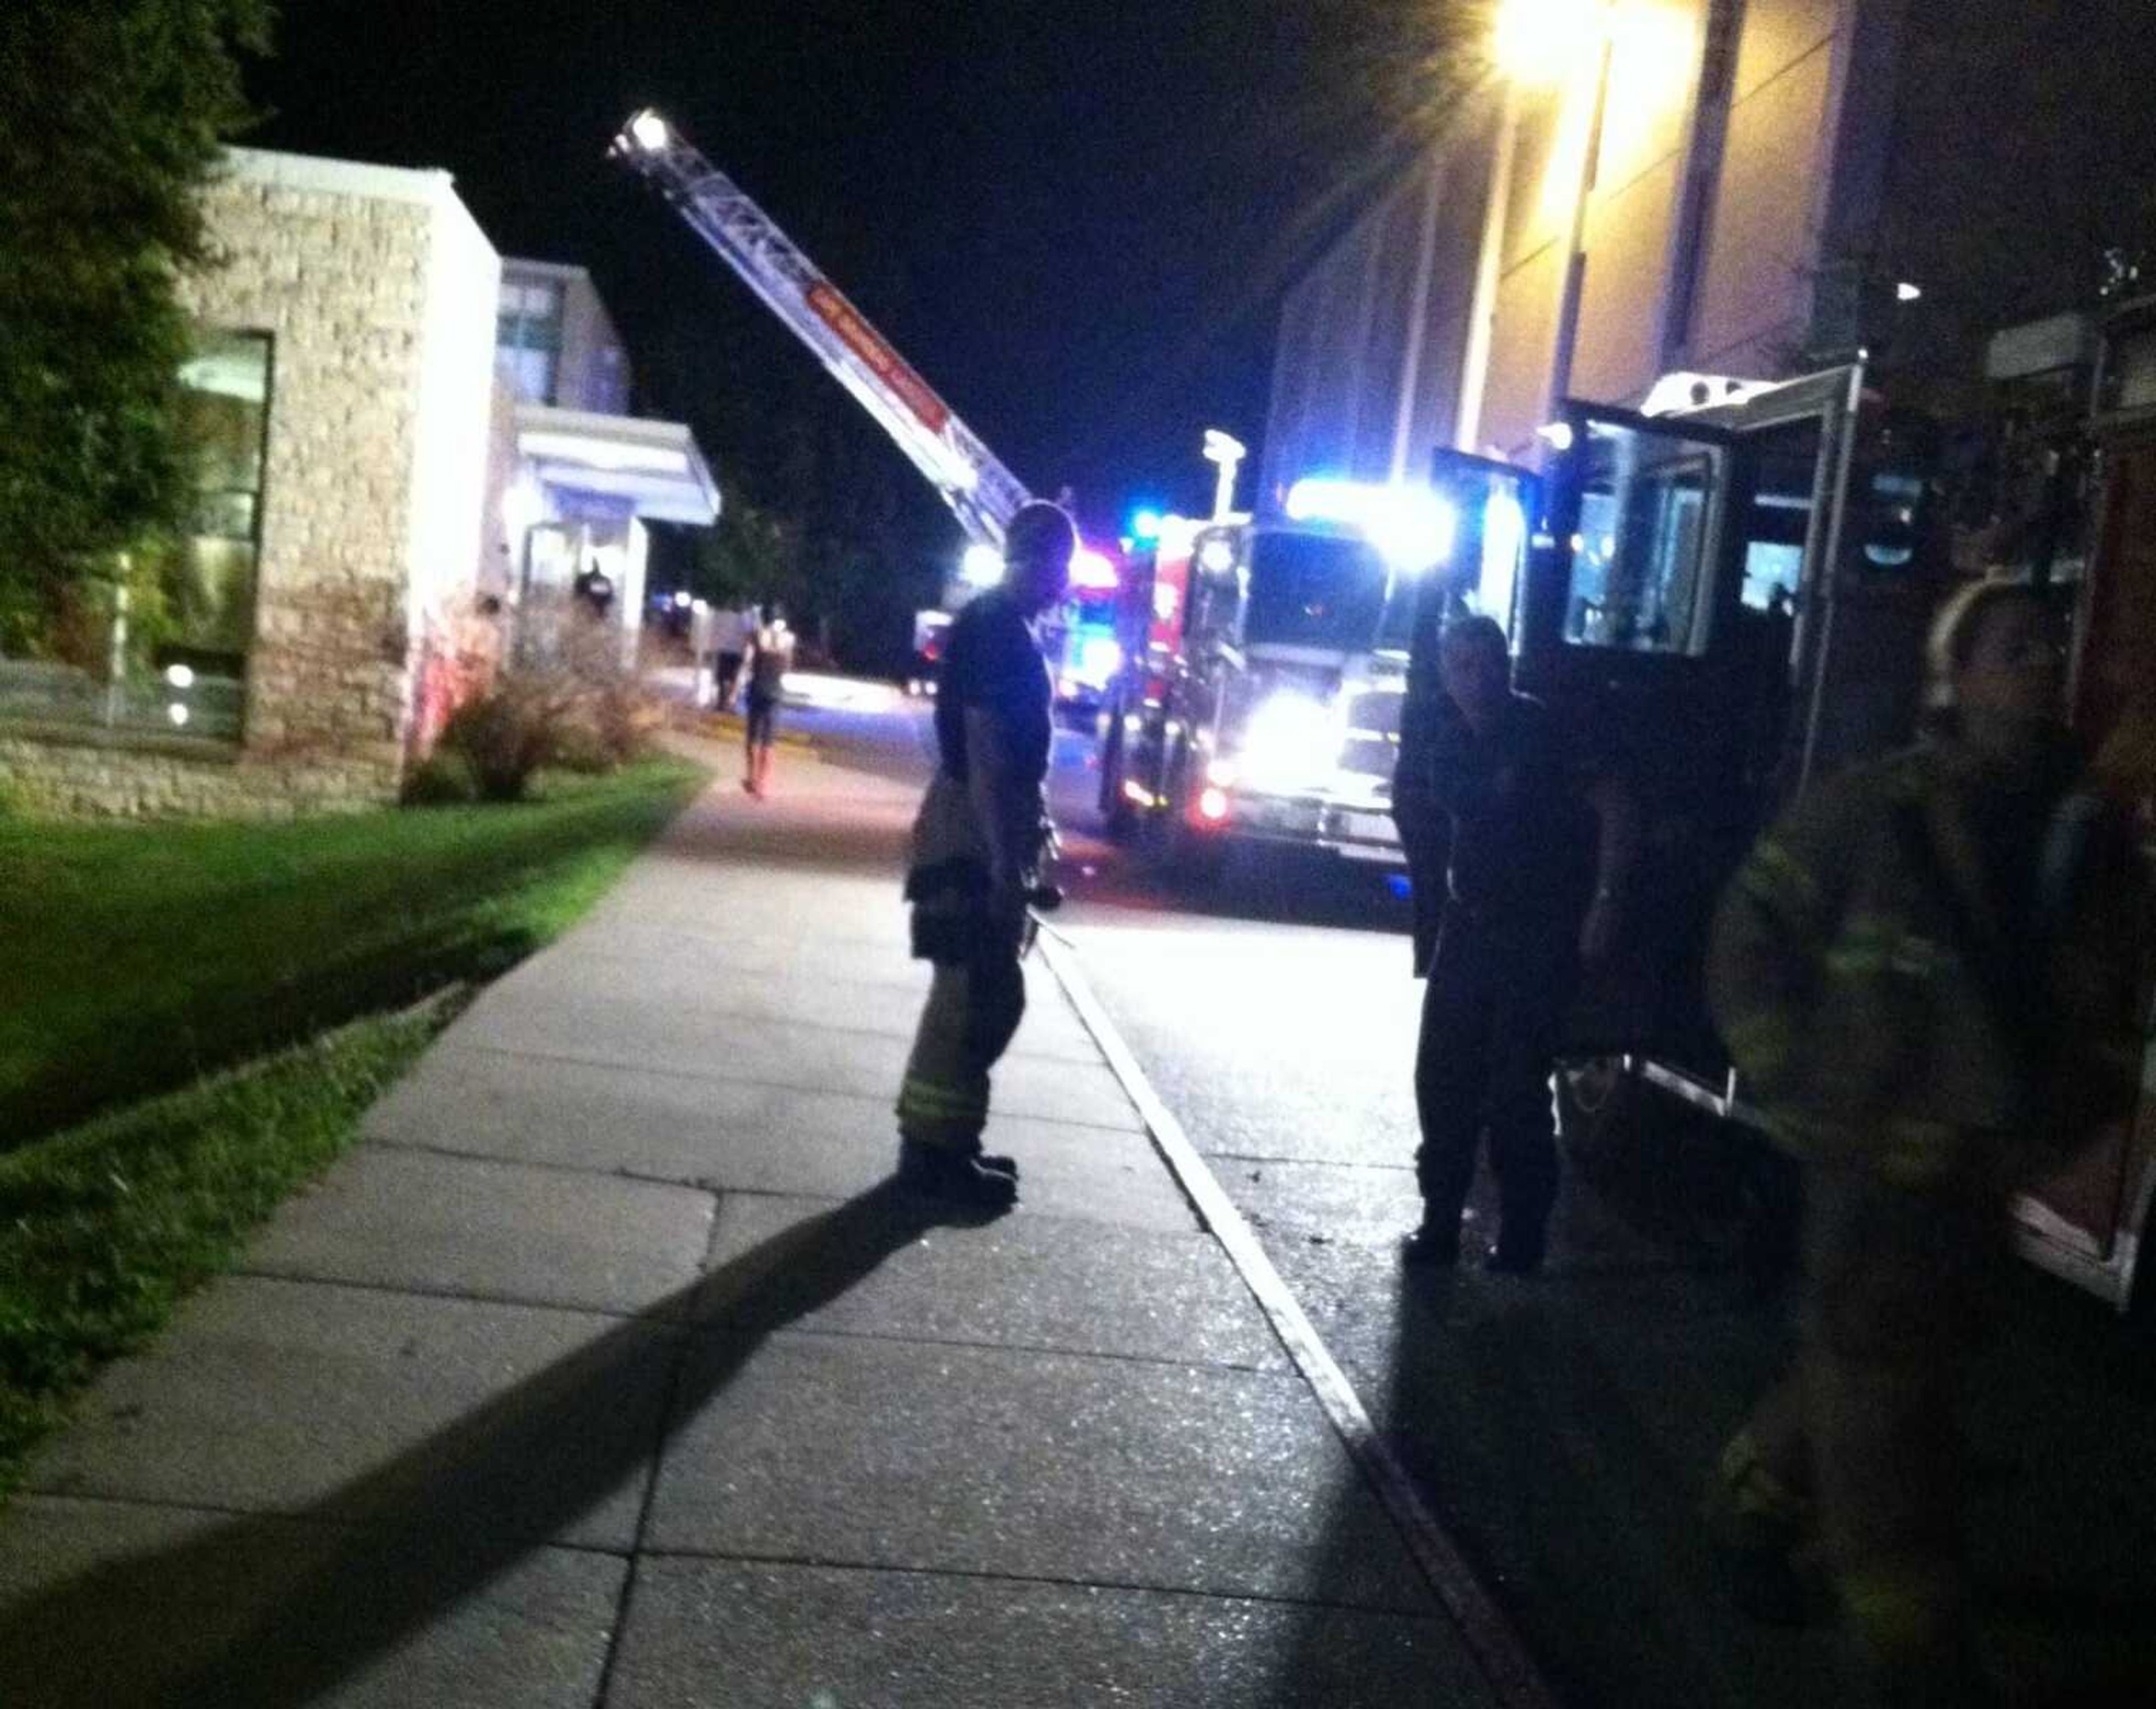 <b>The fire trucks located outside Dearmont Hall at midnight after a supposed electrical issue caused on Sept. 28.</b> Photo by Shannon Eckert